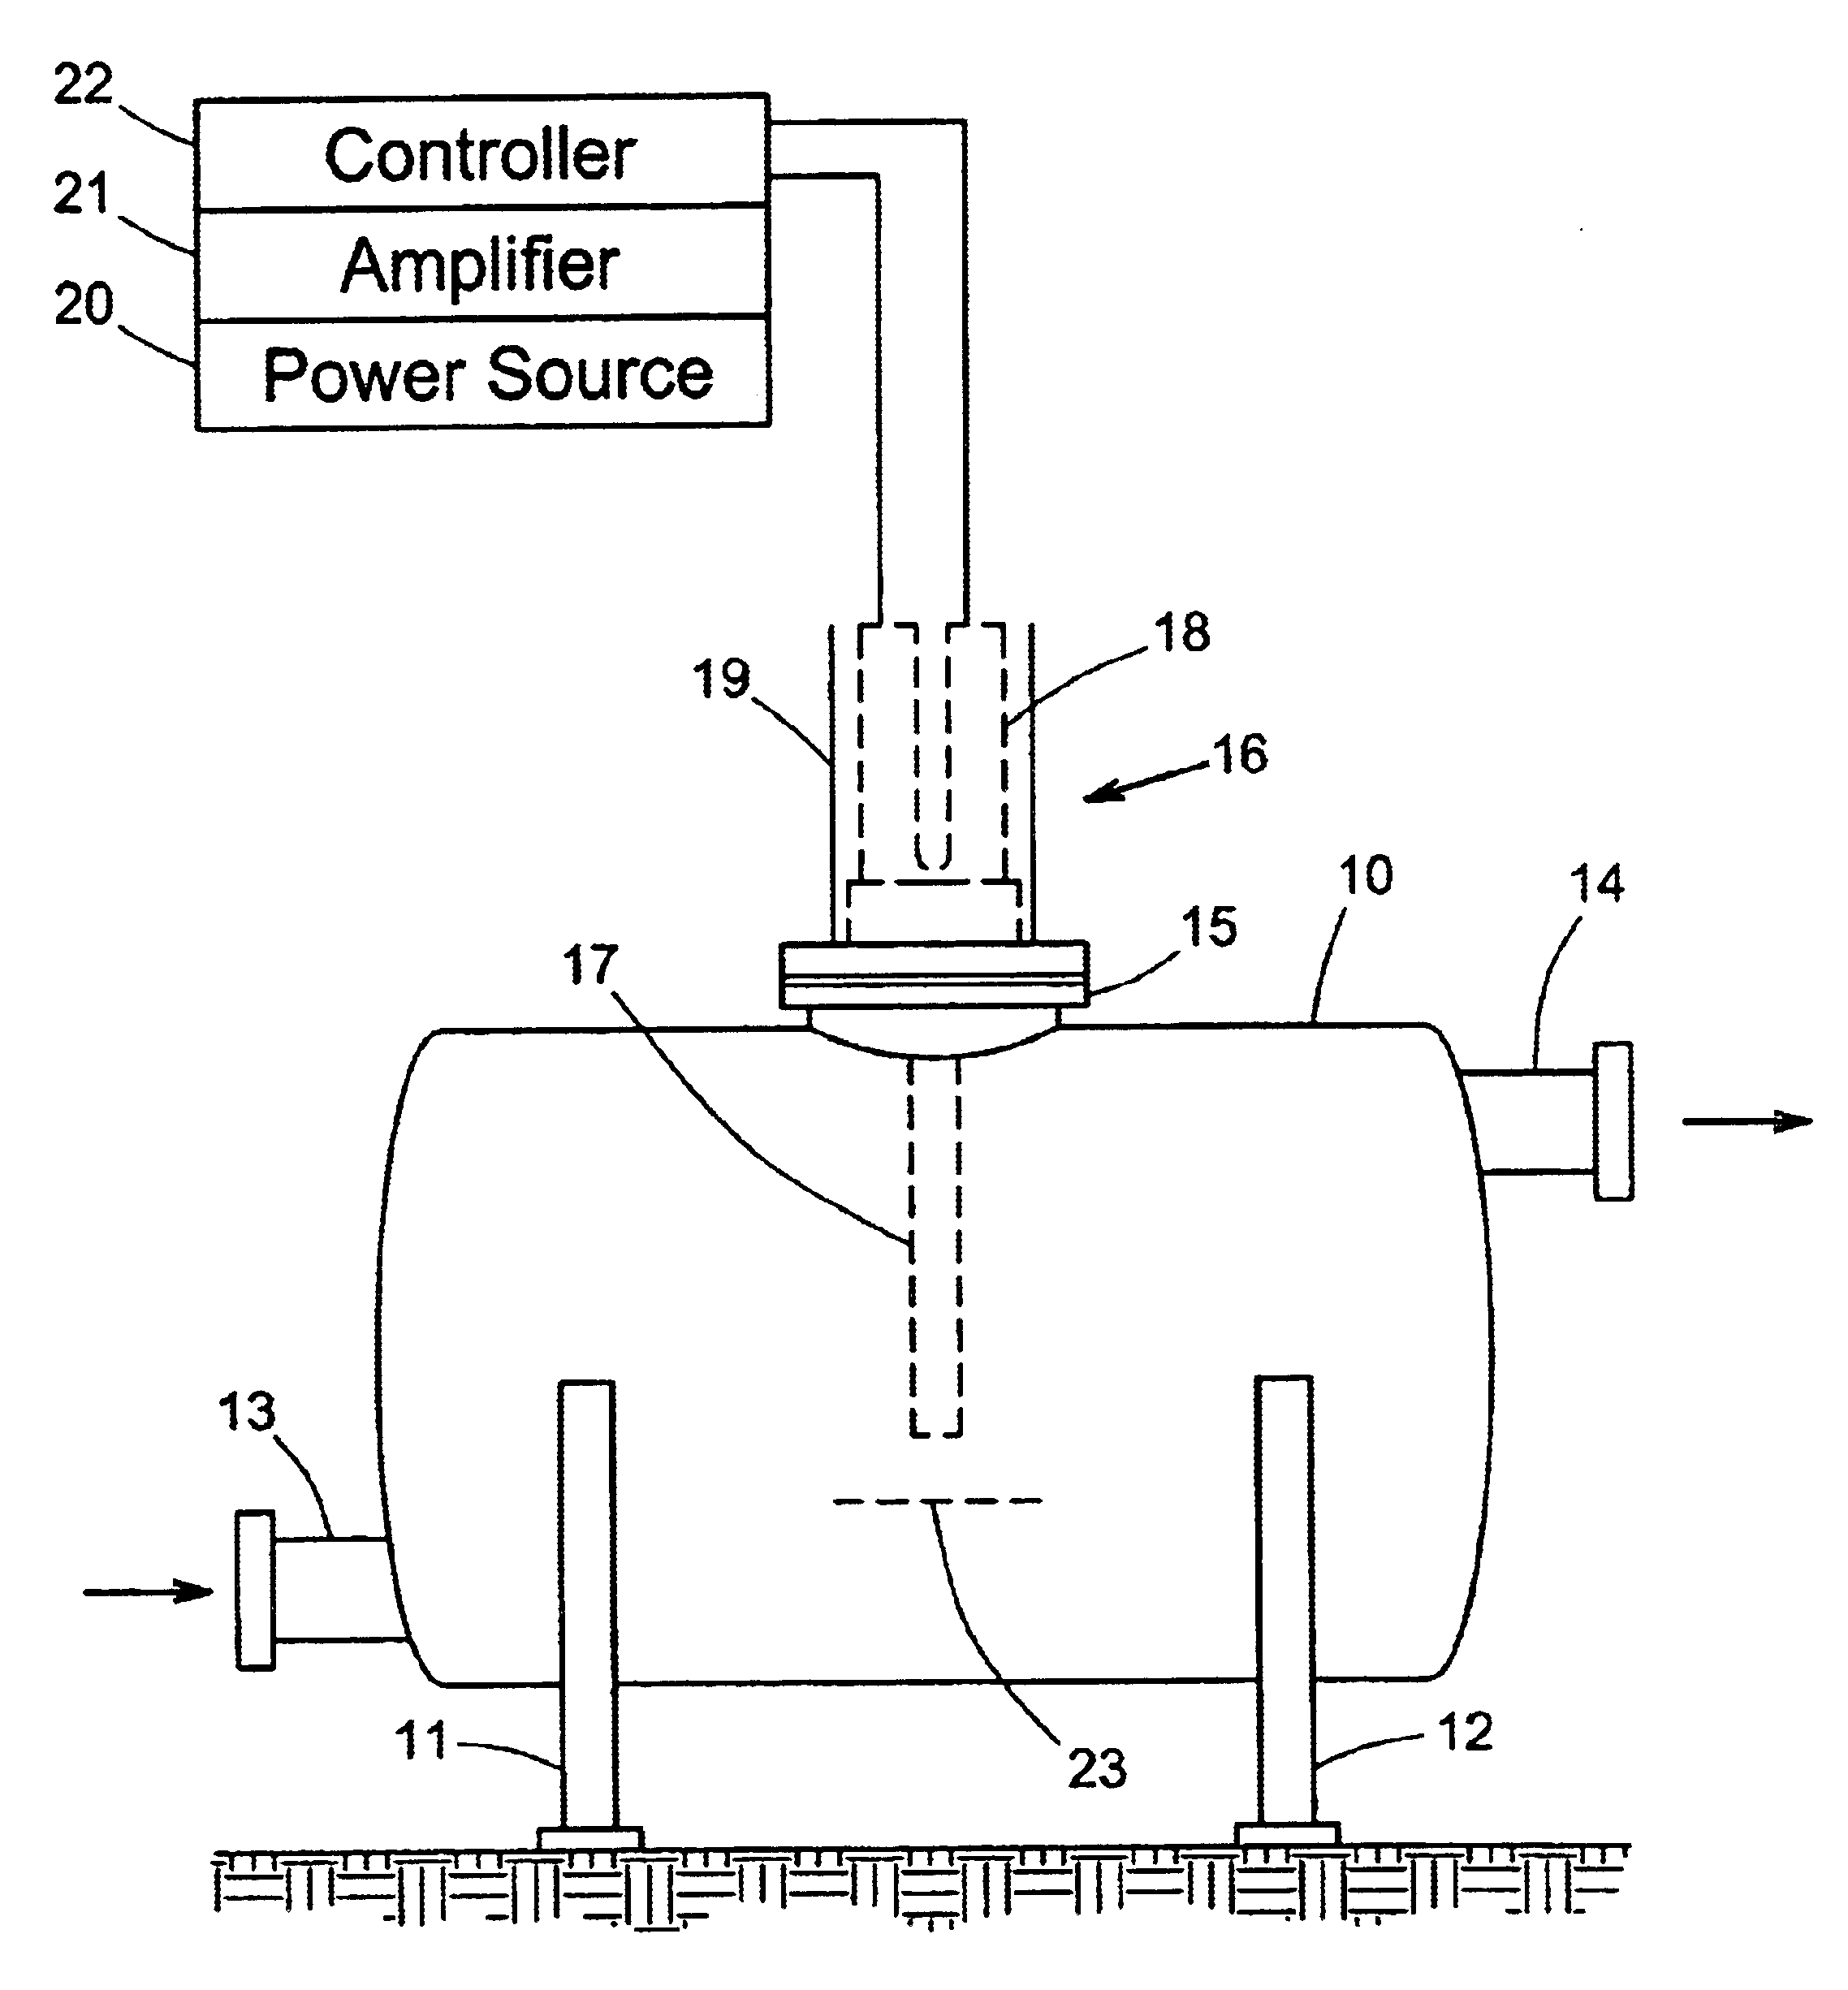 High-power ultrasound generator and use in chemical reactions